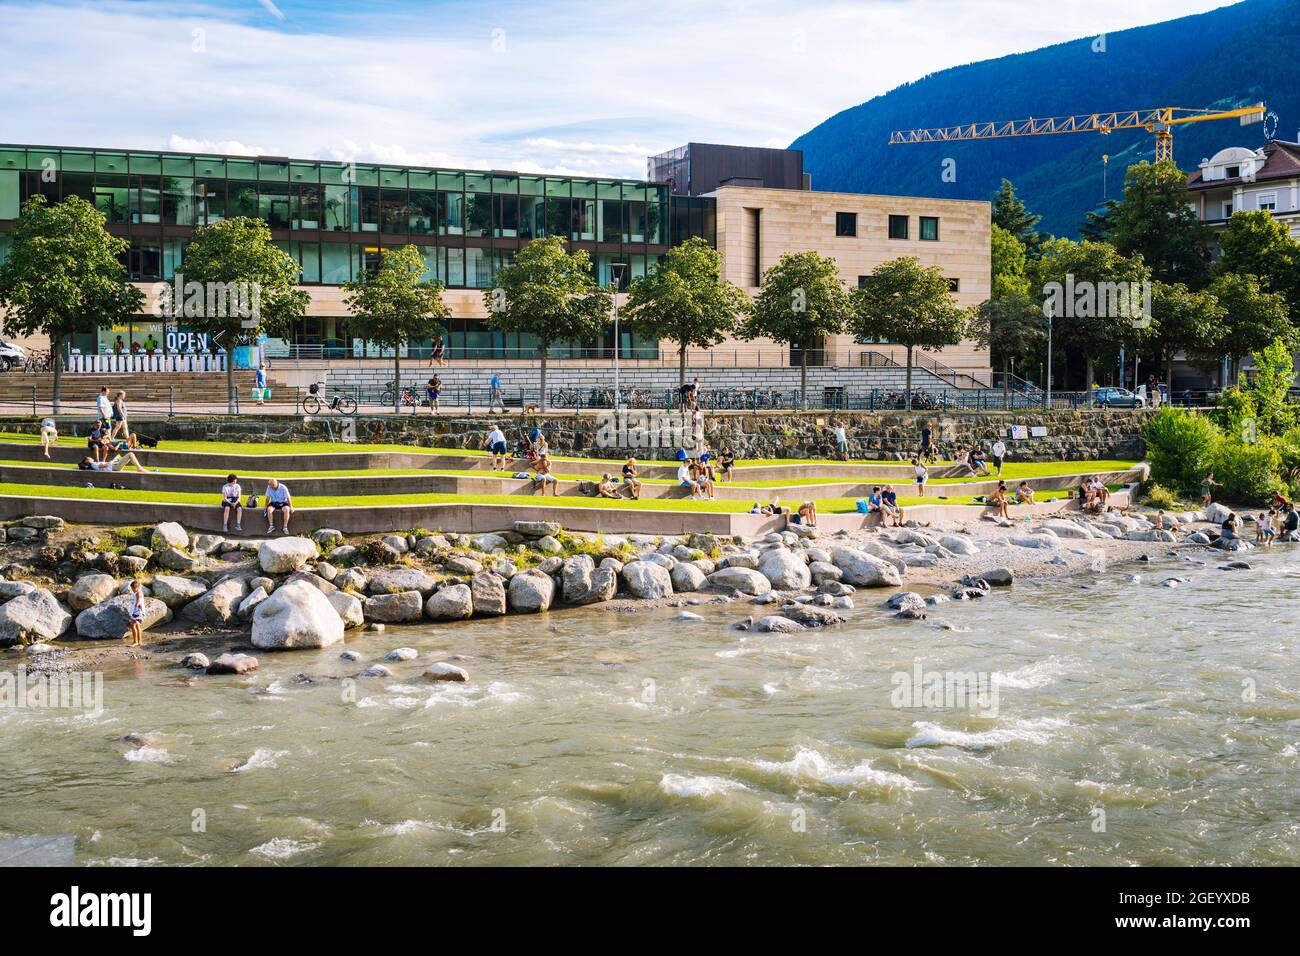 Merano, South Tyrol: Tourists relaxing at the banls of Passer River with the Therme spa in the background Stock Photo